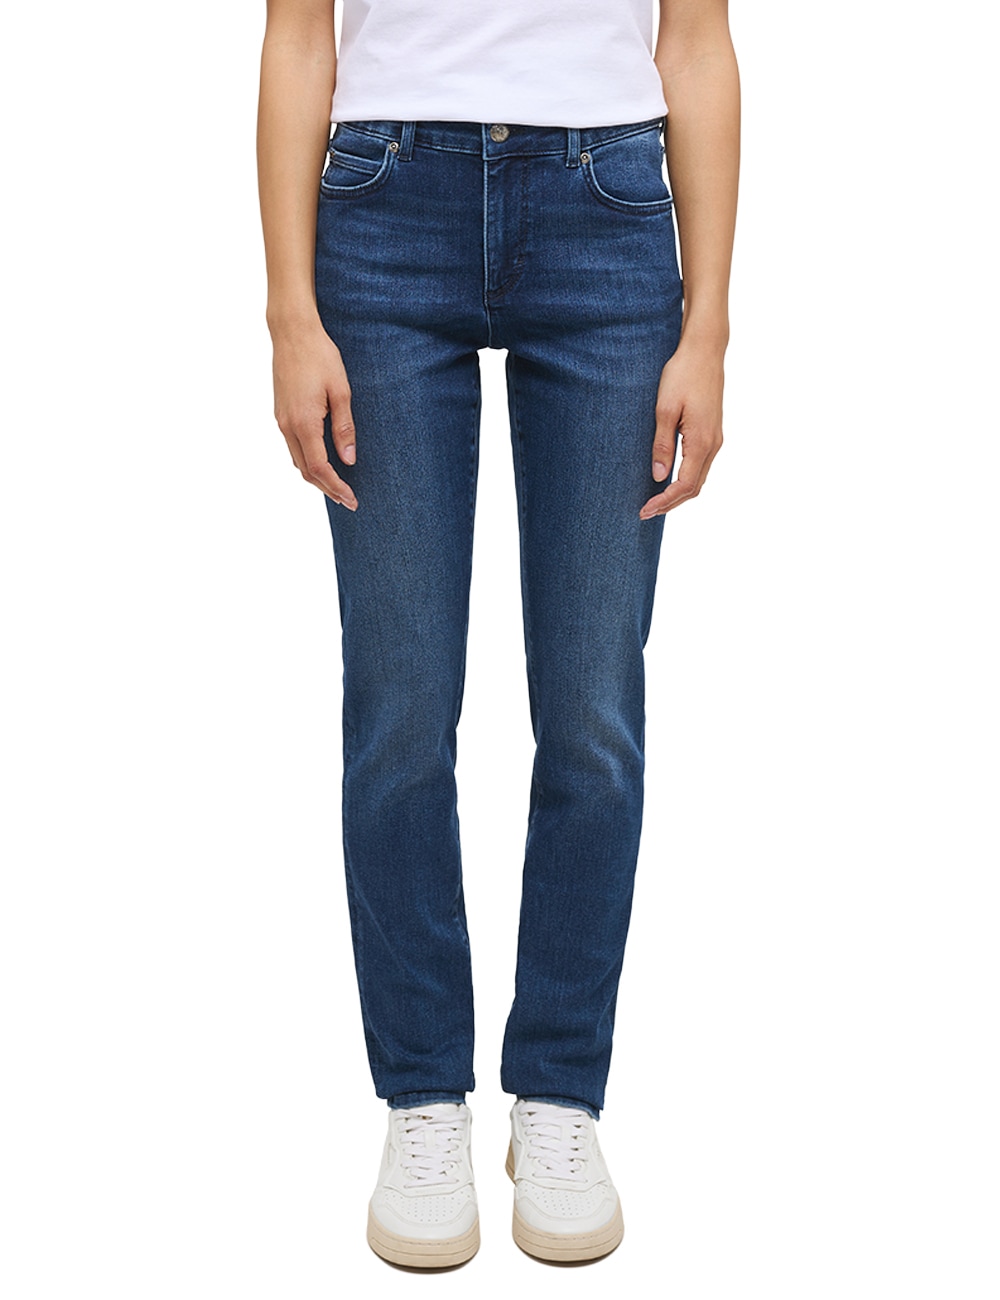 MUSTANG Slim-fit-Jeans »Style Crosby Relaxed Slim« von mustang